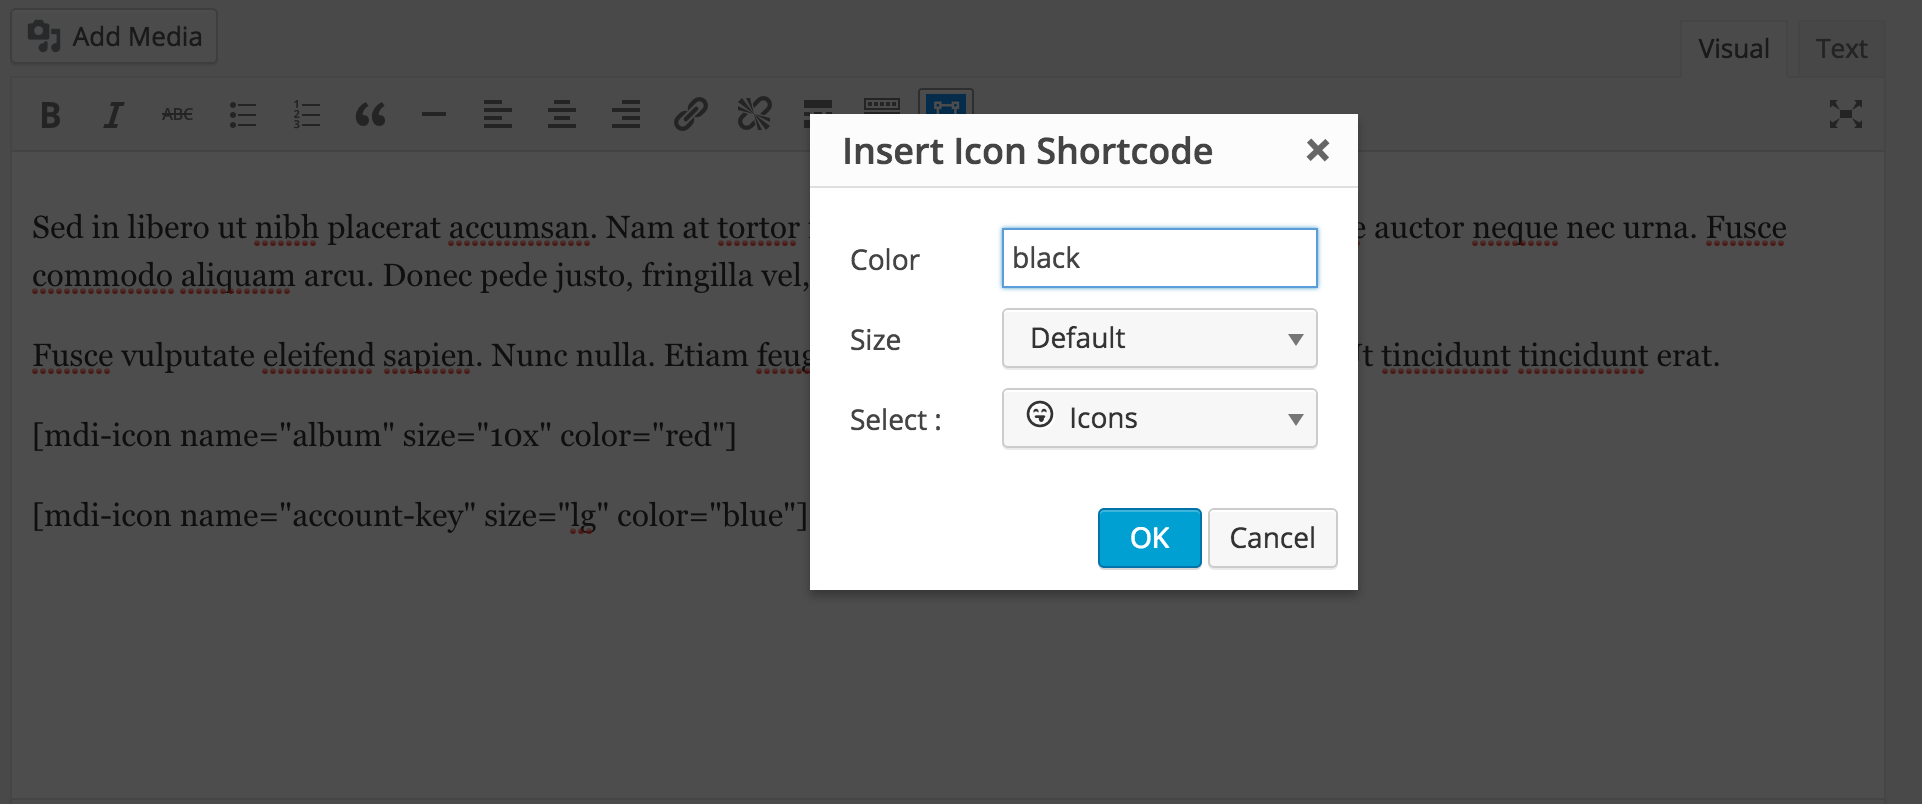 When you click the Material Design Icon in the post editor a pop-up window will appear to help build your icon shortcode.